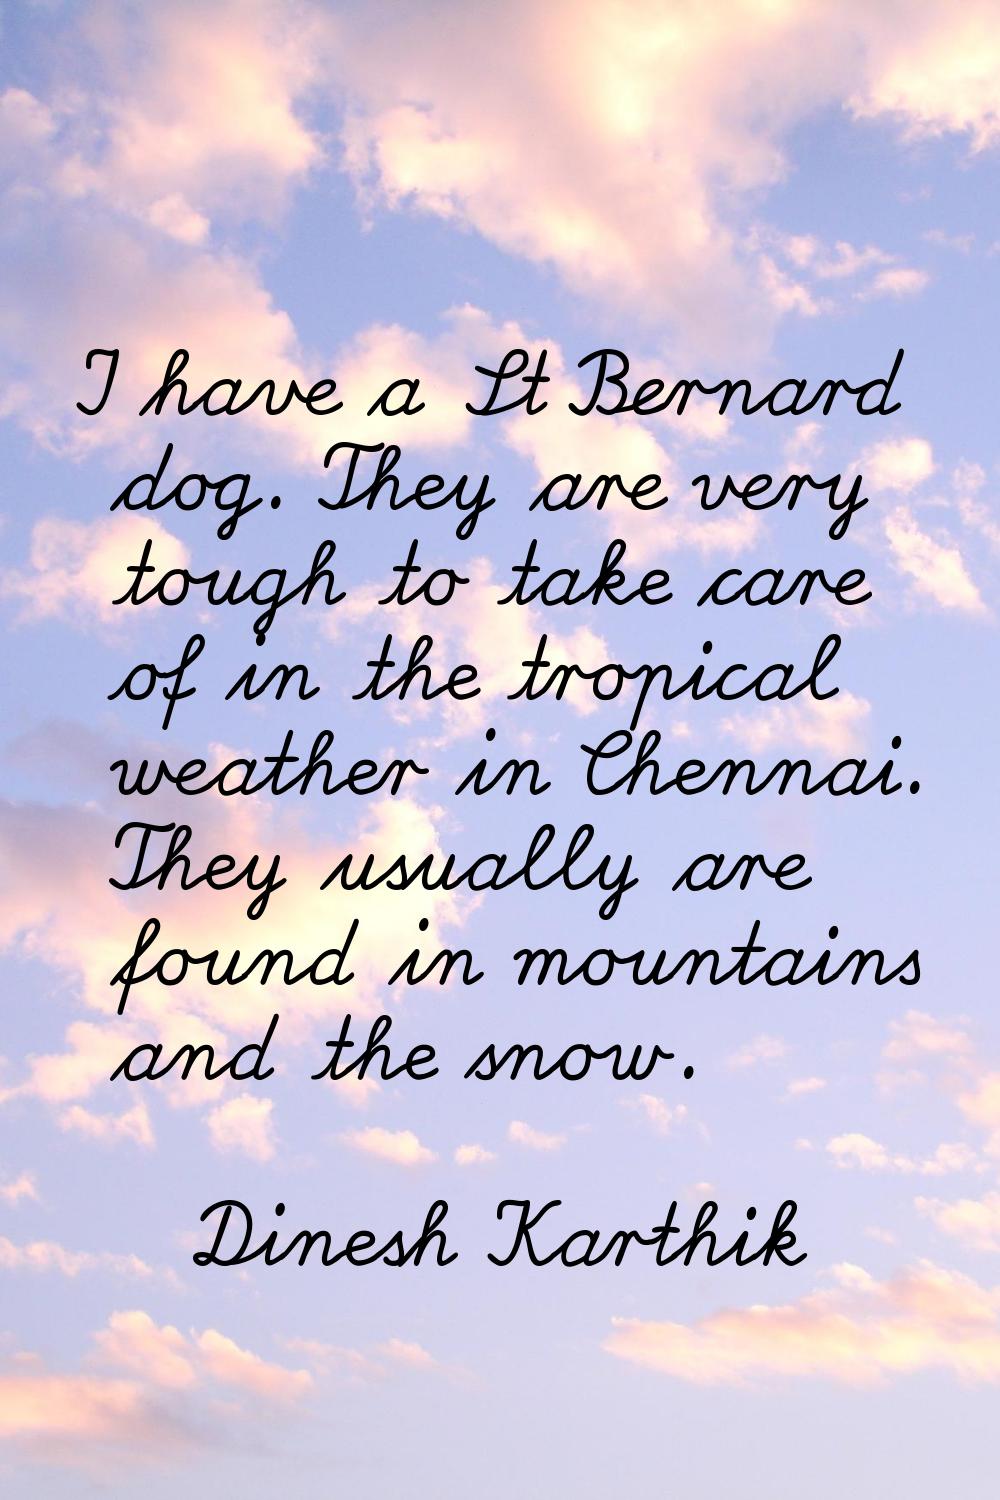 I have a St Bernard dog. They are very tough to take care of in the tropical weather in Chennai. Th